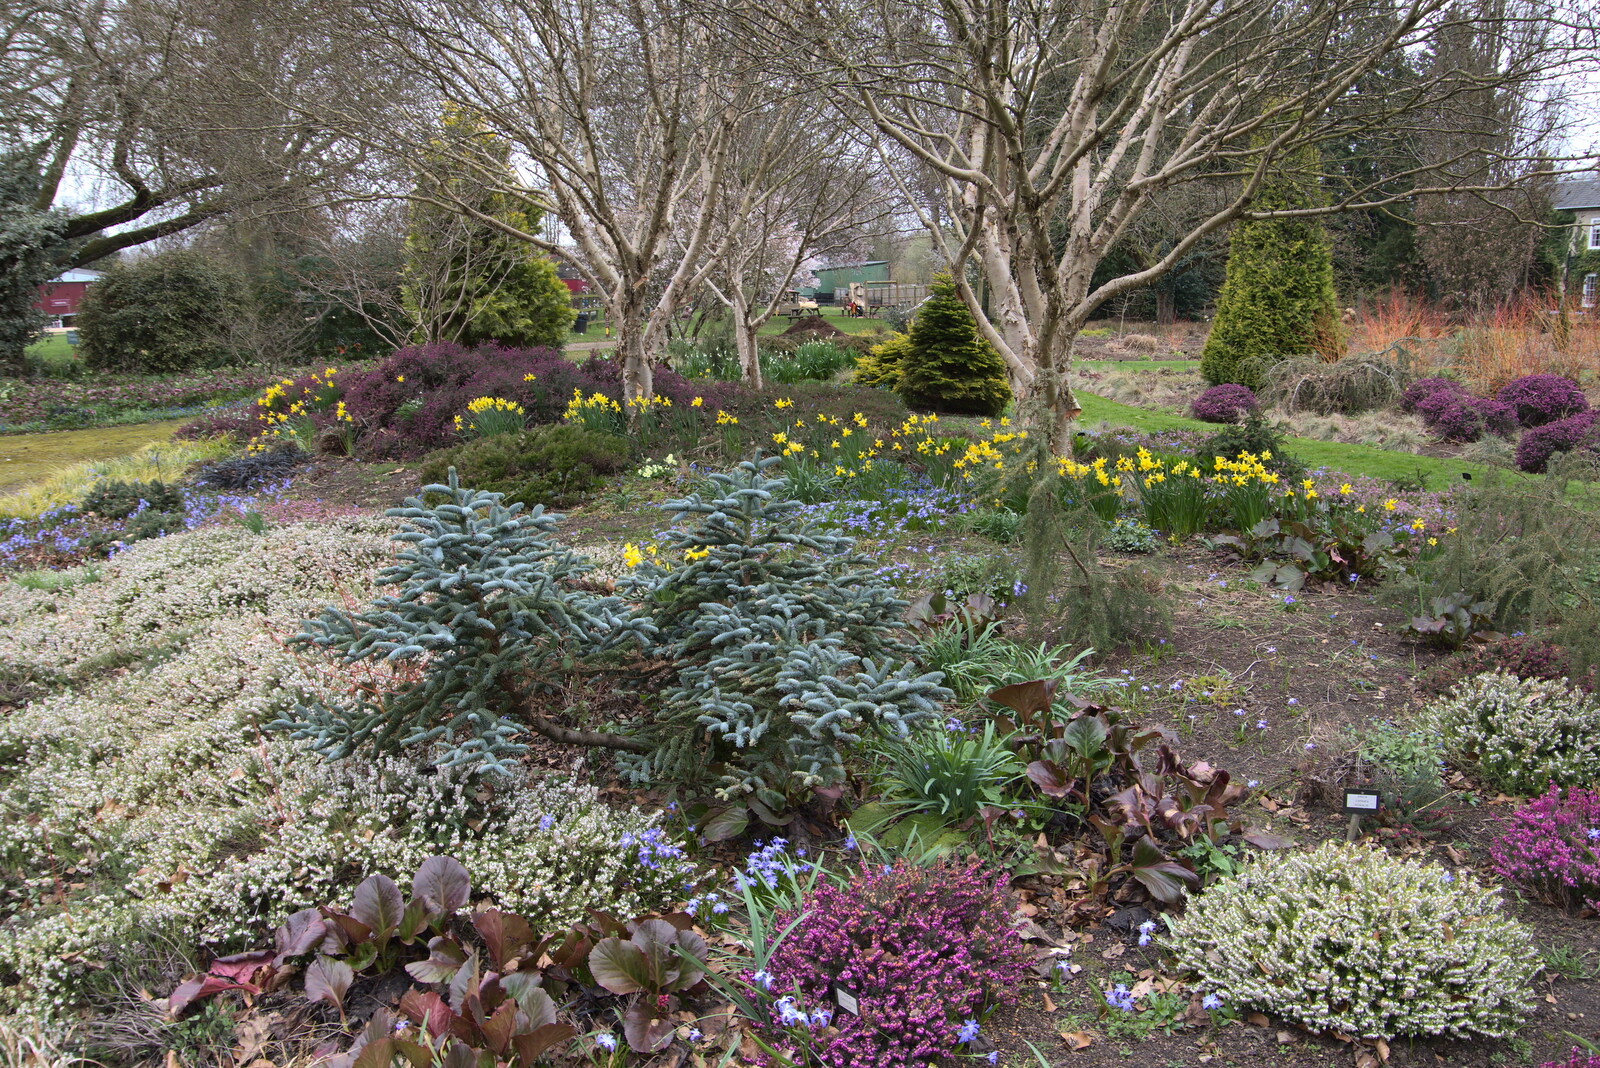 The Winter Garden at Bressingham from A Return to Bressingham Steam and Gardens, Bressingham, Norfolk - 28th March 2021